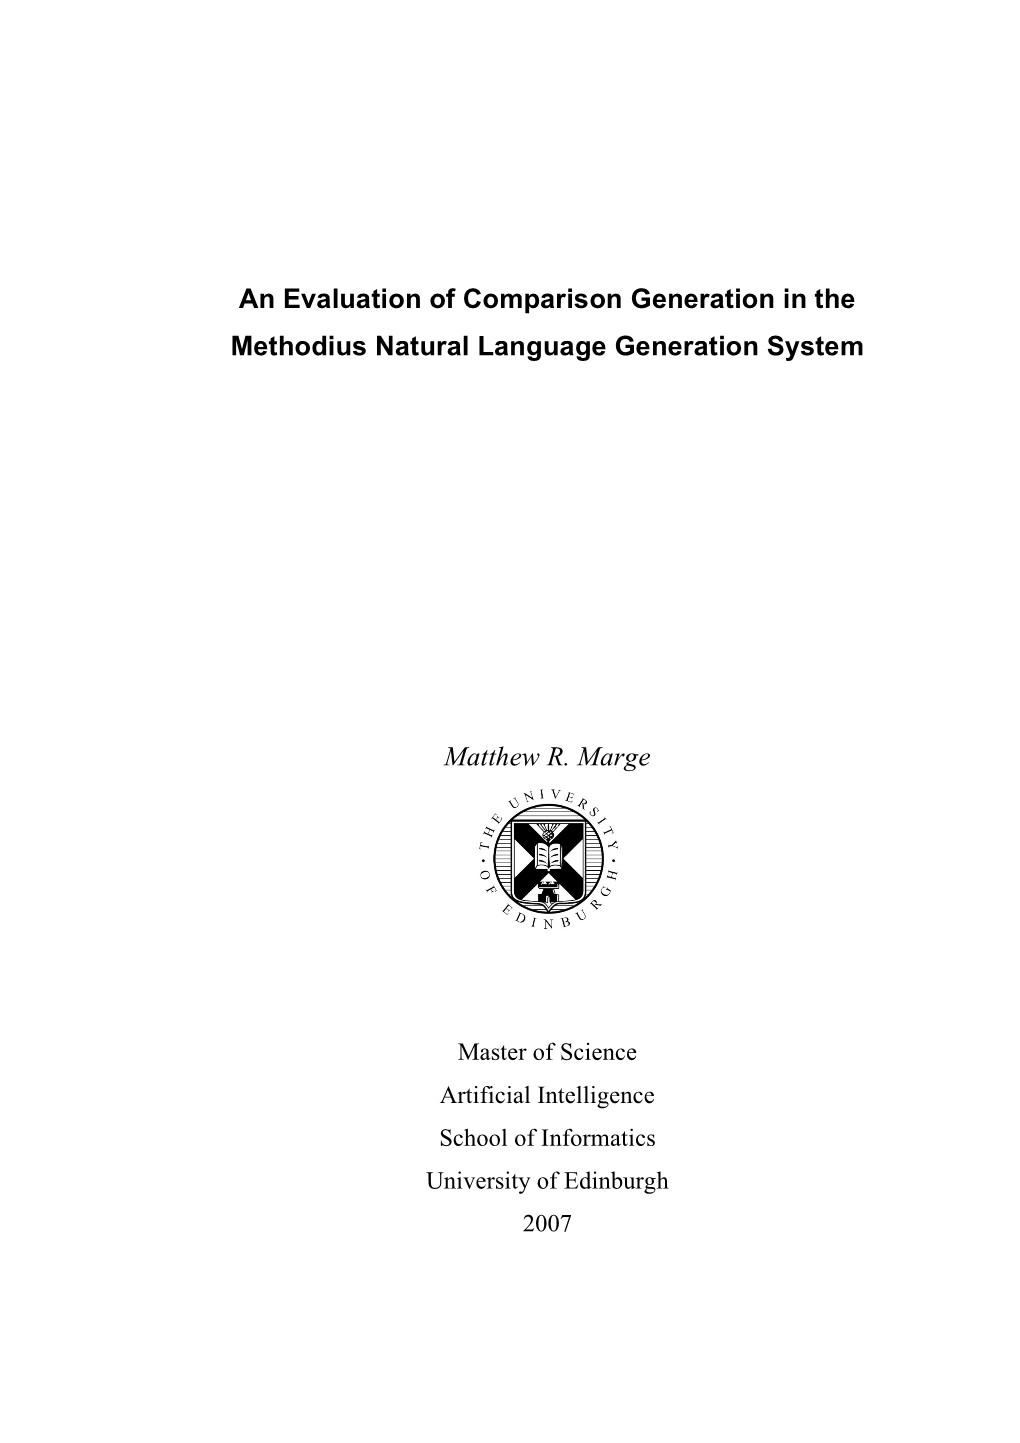 An Evaluation of Comparison Generation in the Methodius Natural Language Generation System Matthew R. Marge